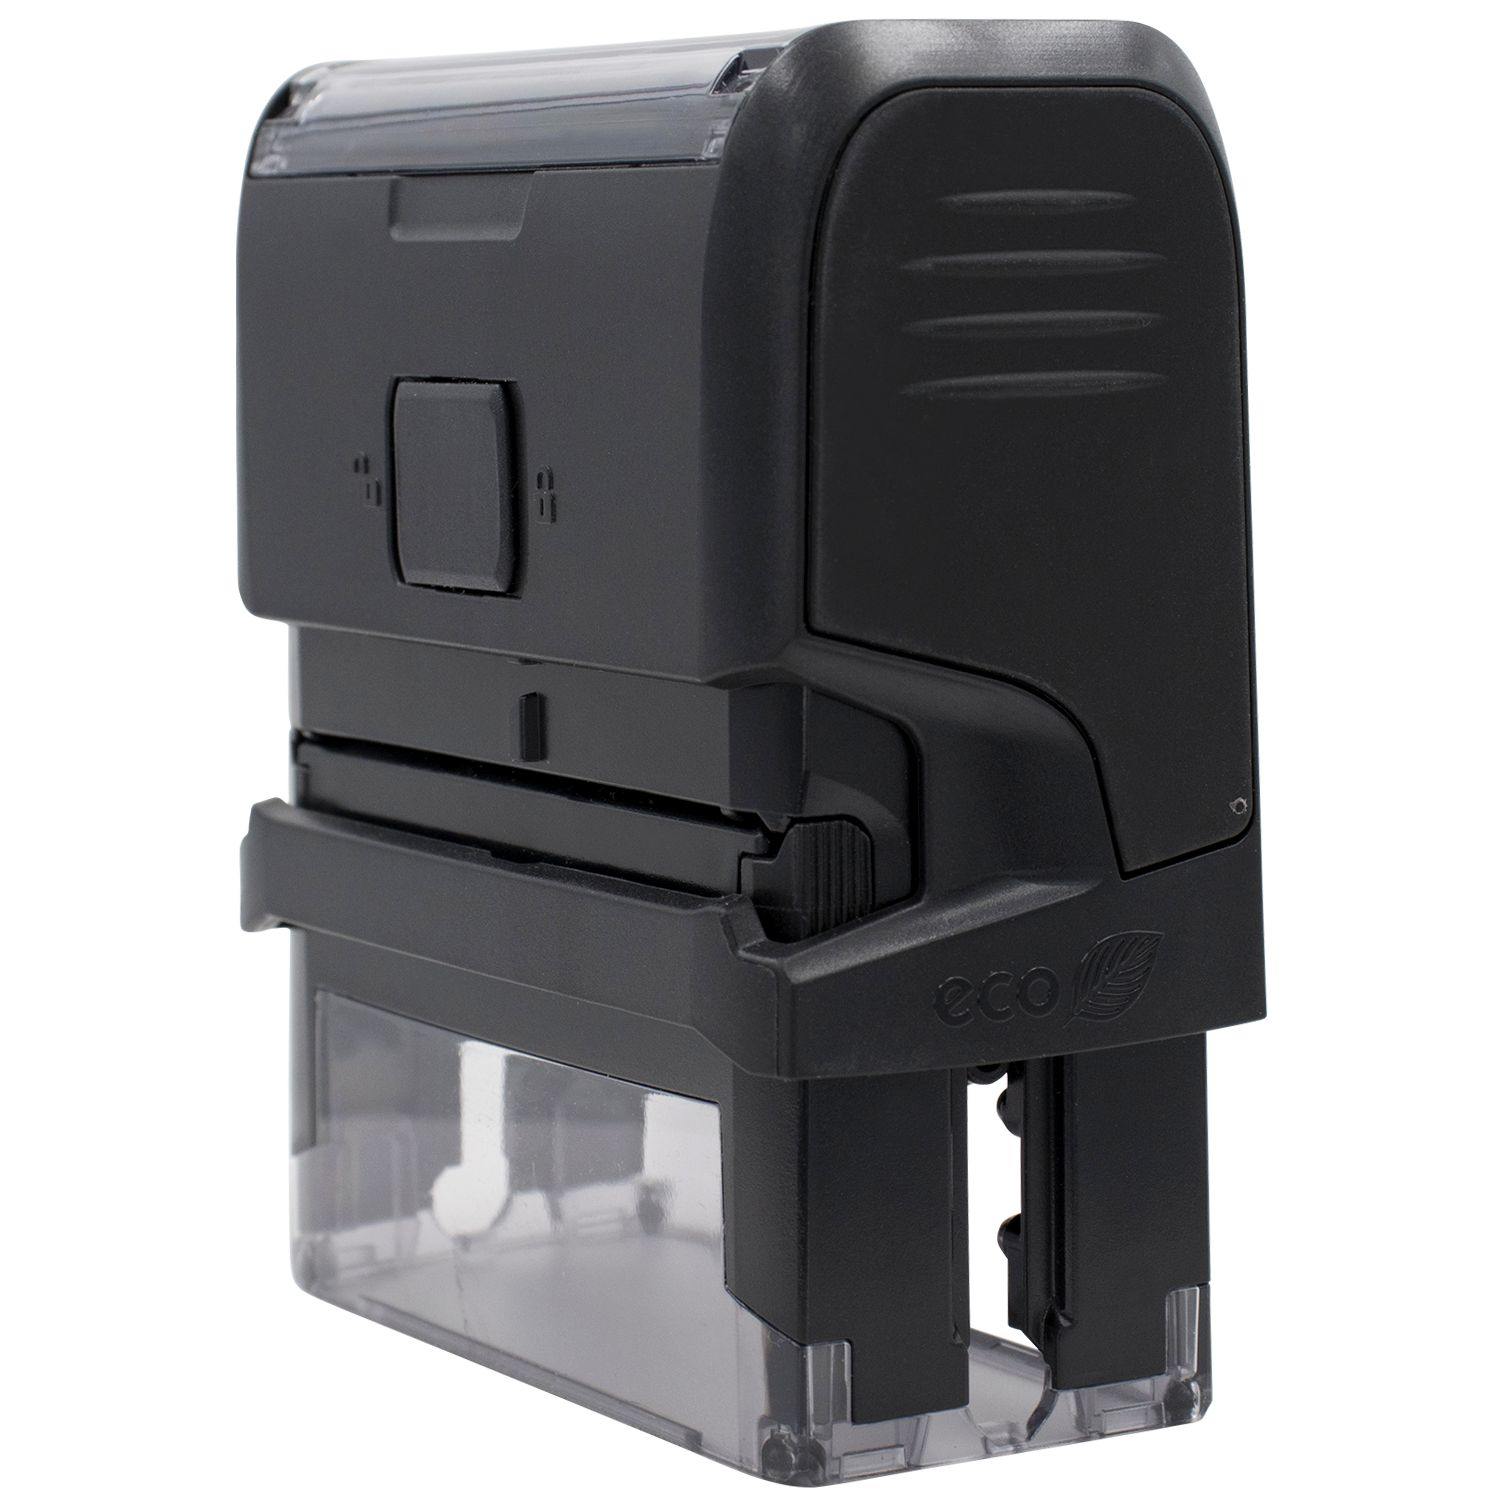 Self Inking Validated Stamp - Engineer Seal Stamps - Brand_Trodat, Impression Size_Small, Stamp Type_Self-Inking Stamp, Type of Use_Office